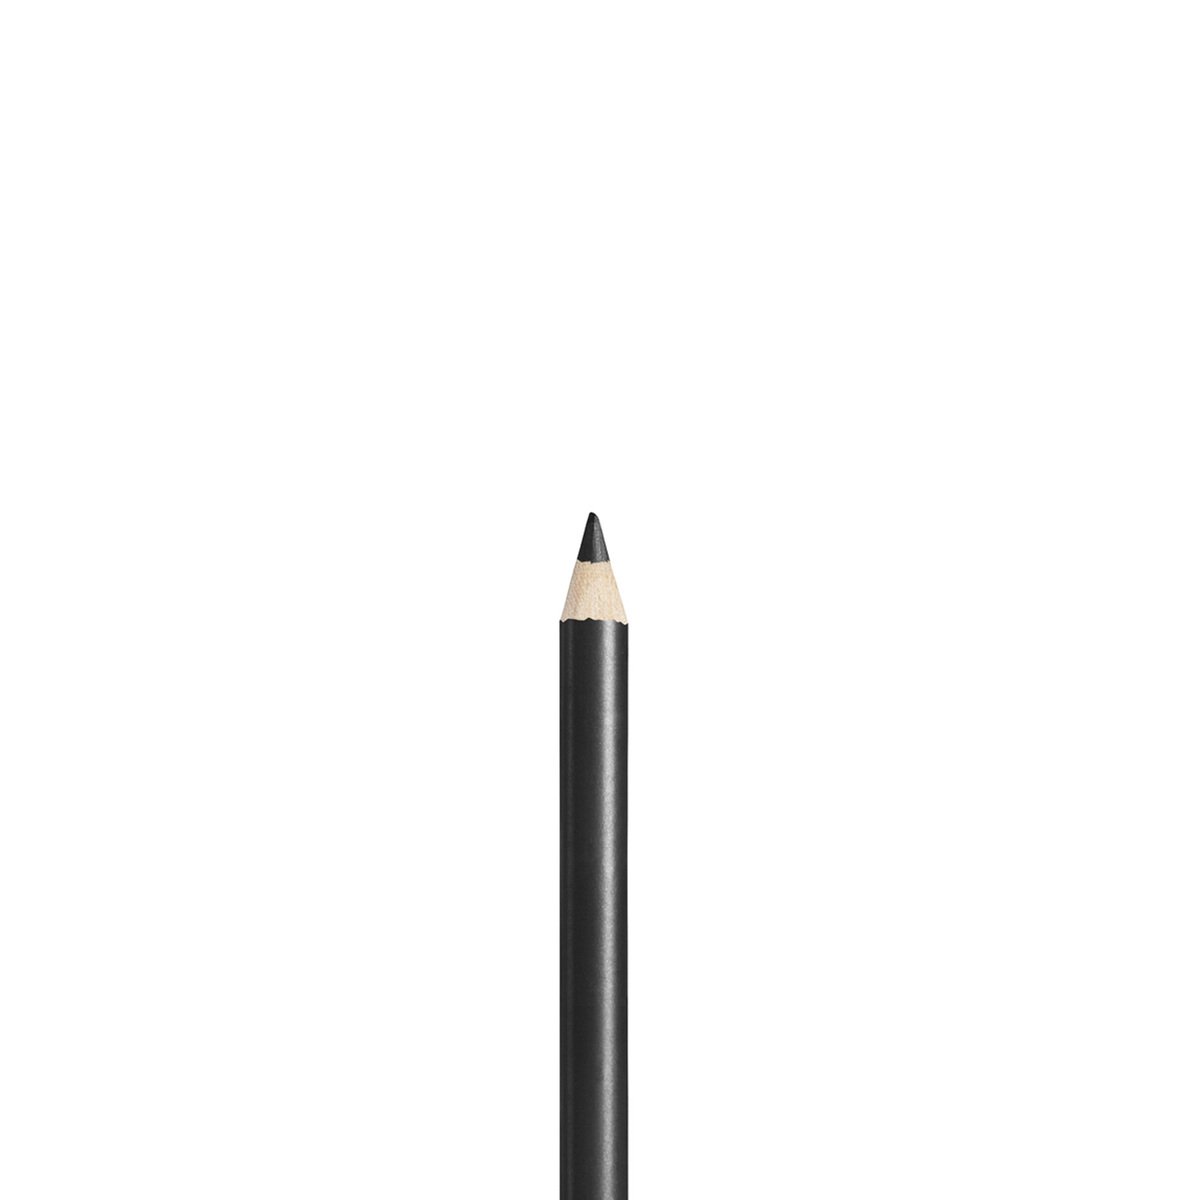 Wet And Wild Khol Liner Pencil Baby's Got Black WnW00E601A 1pc